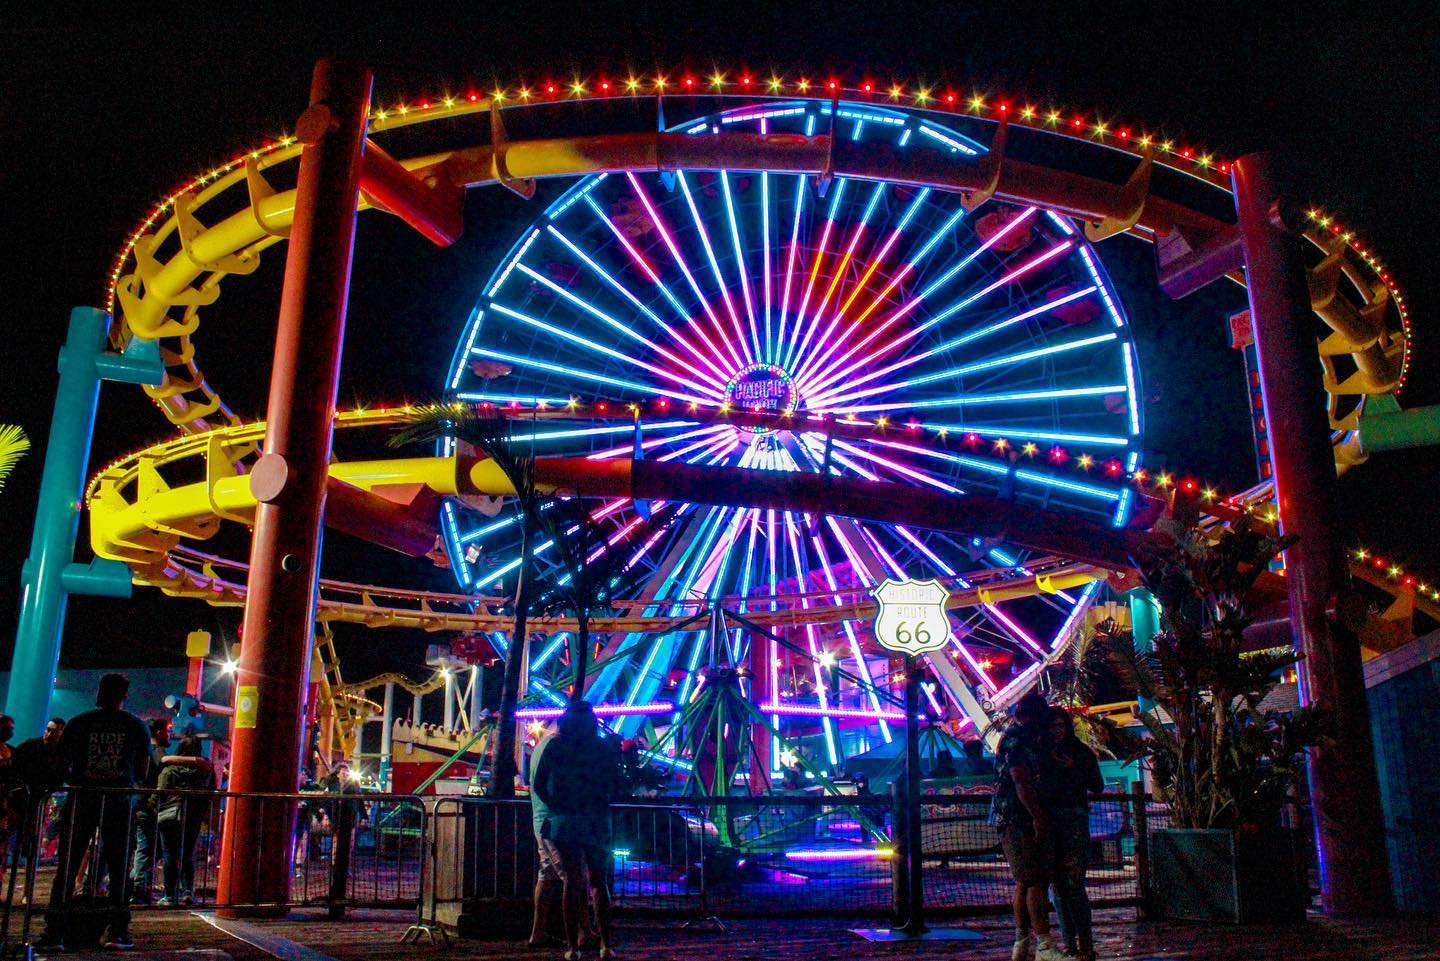 The Santa Monica Pier Ferris Wheel will be lit yellow, orange, pink, purple, and blue on Thursday, September 15 in recognition of Hispanic Heritage Month.🎡  Hispanic Heritage Month is an opportunity to recognize and celebrate the culture, contributions, and heritage of American people whose ancestors came from Spain, Mexico, the Caribbean, Central America, and South America. 🇪🇸🇲🇽🇳🇱🇬🇹🇭🇳  Enjoy watching the light program online at www.pacpark.com/live.✨  📸: @jesus_ej
.
.
.
#pacificpark #pacpark #santamonicapier #santamonica #wheellighting #pacificwheel #wheellighting #pacificwheel #hispanic #hispanicheritage #latino #latina #latinx @abc7la @discoverla @cbsla @ktla5news @foxla @seesantamonica @smdailypress